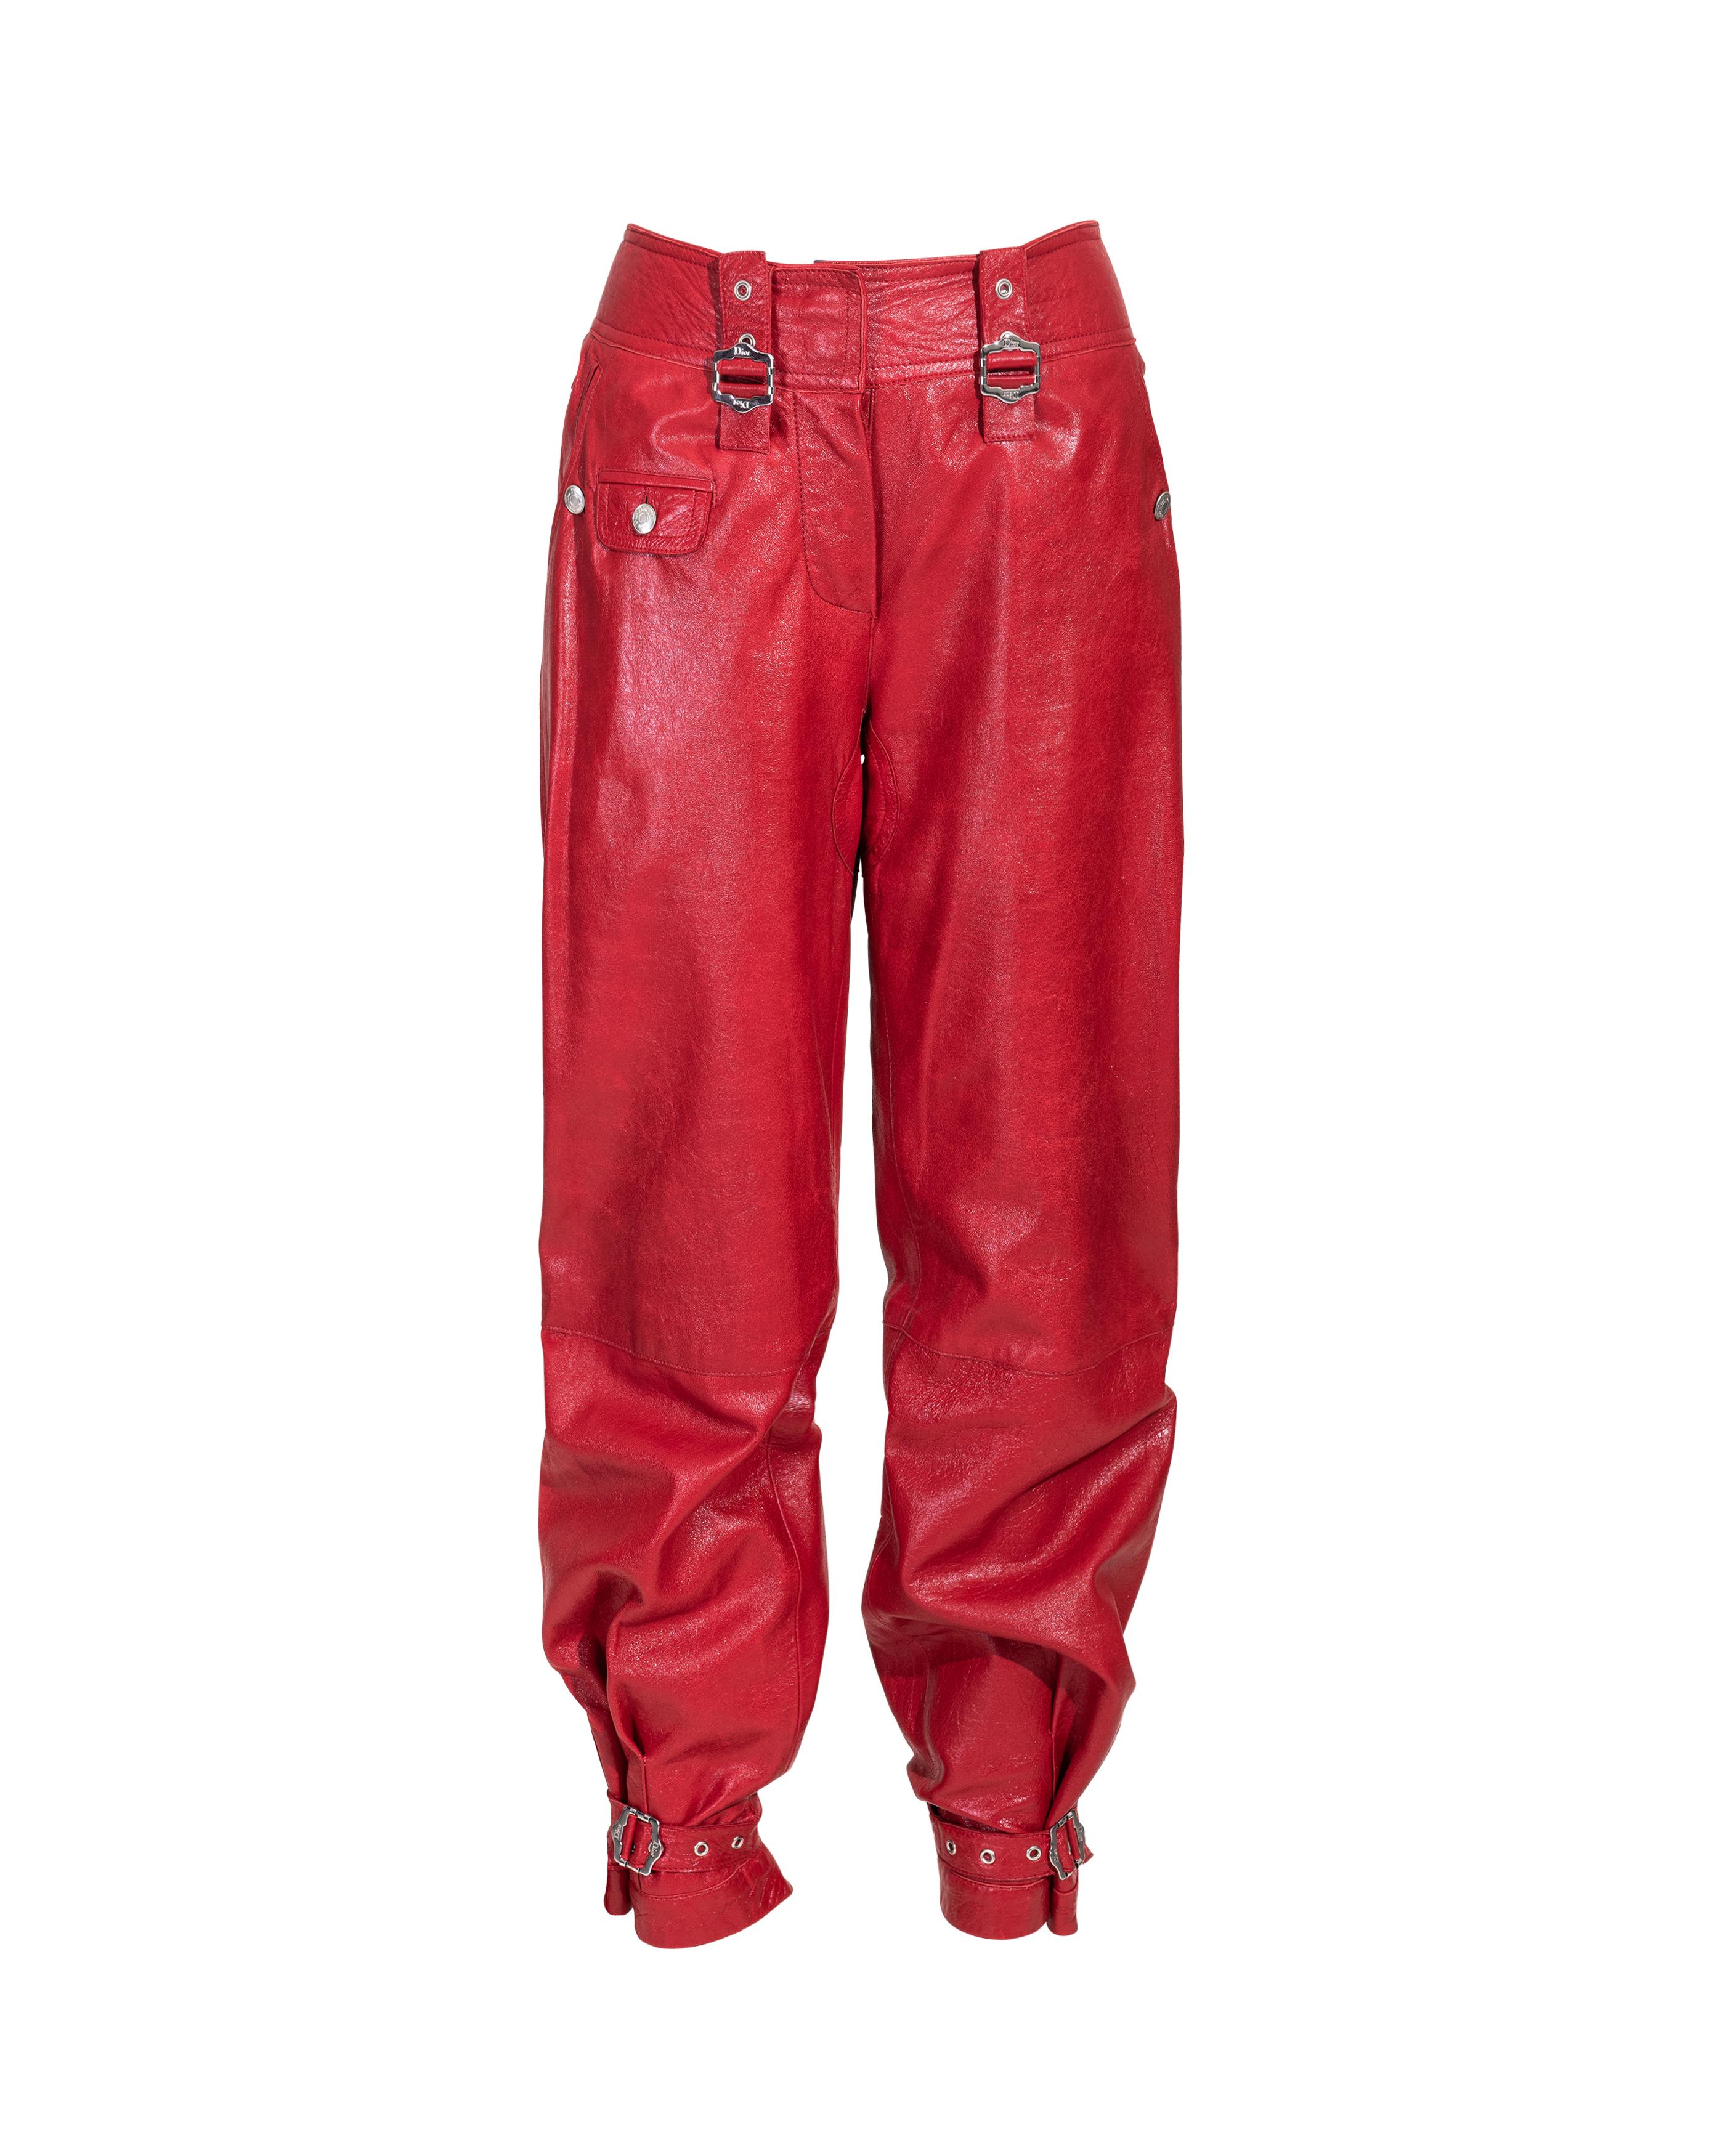 A/W 2003 Christian Dior ‘Hard Core’ Collection Red Leather Pants For Sale 5